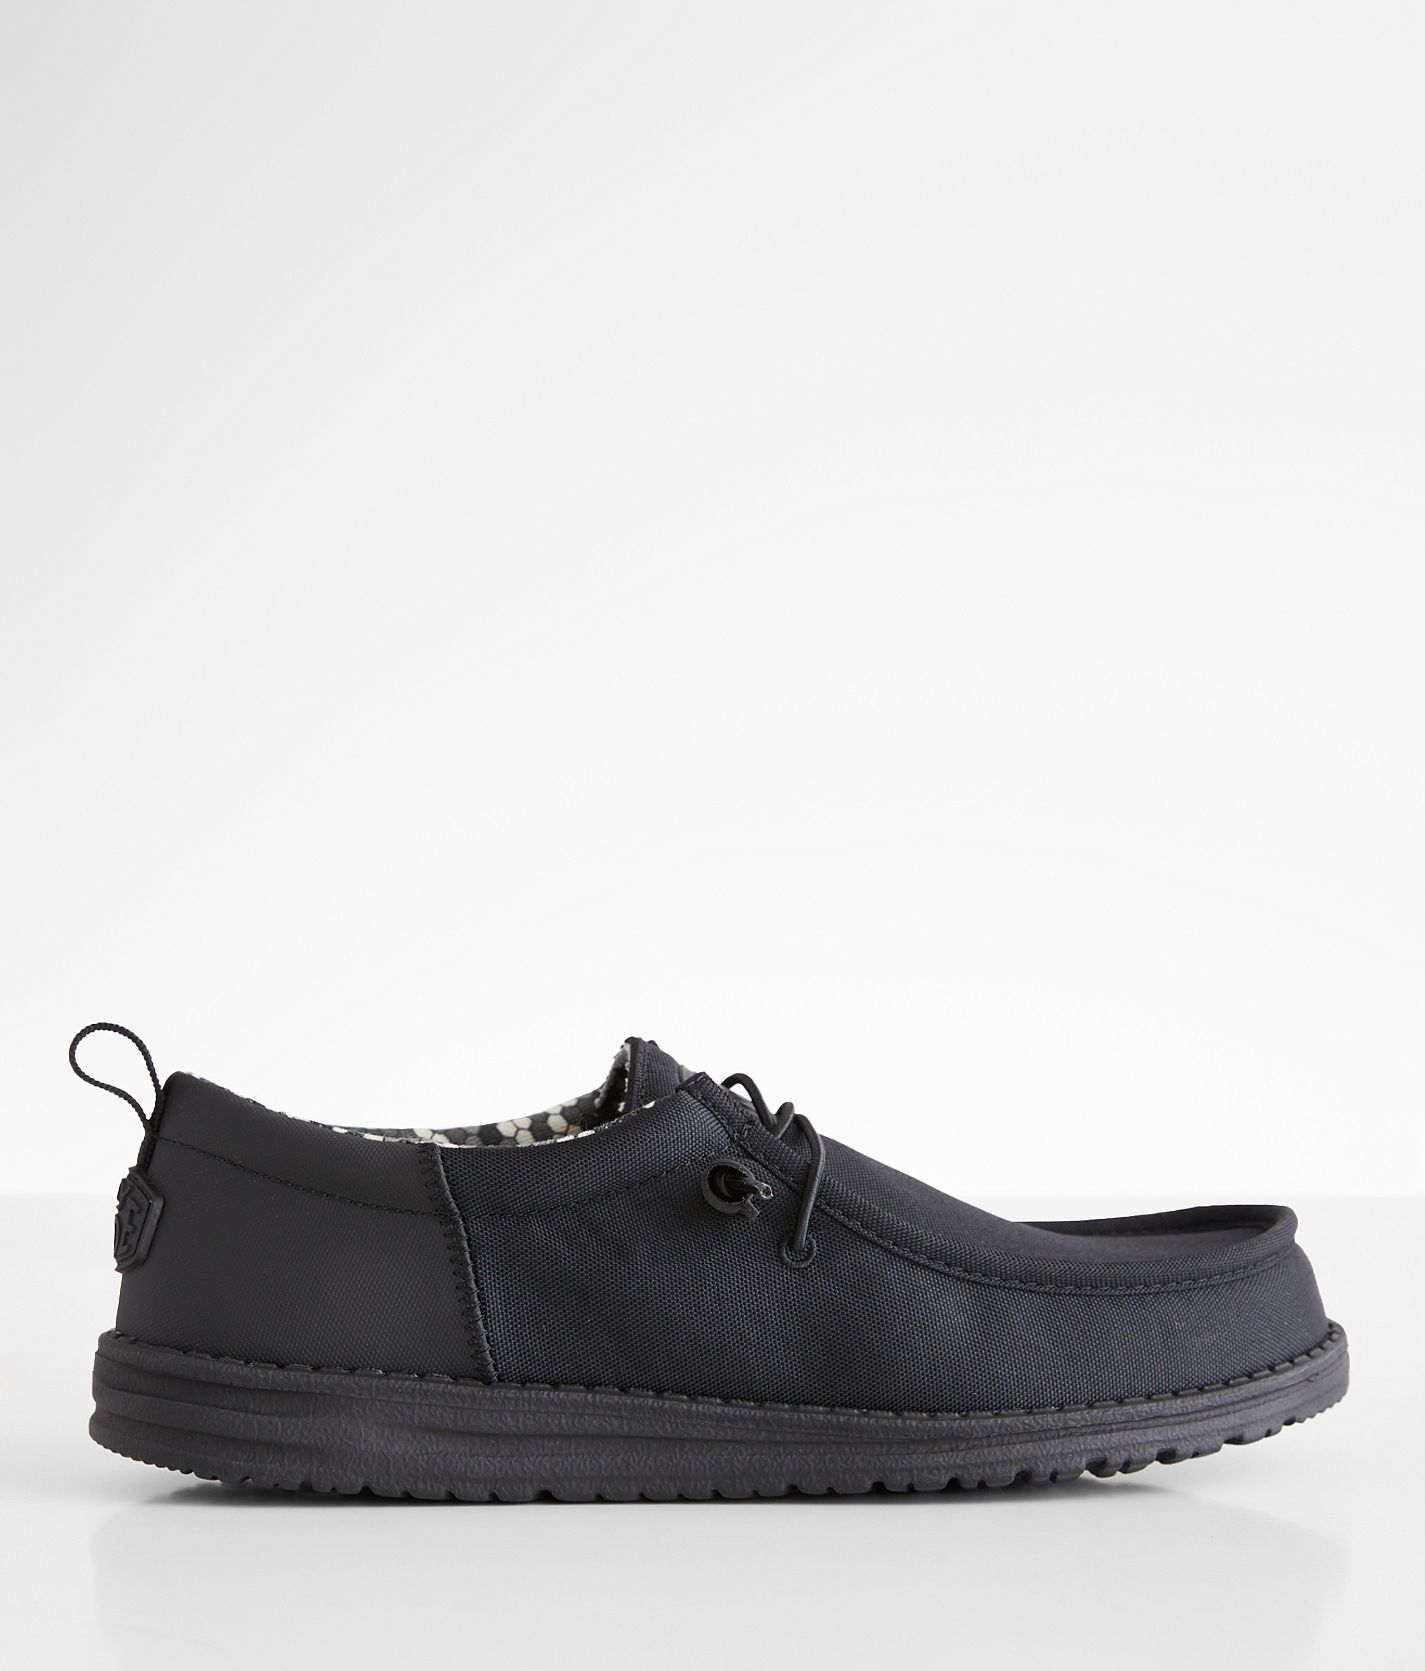 HEYDUDE™ Wally Mexico Shoe - Men's Shoes in Black